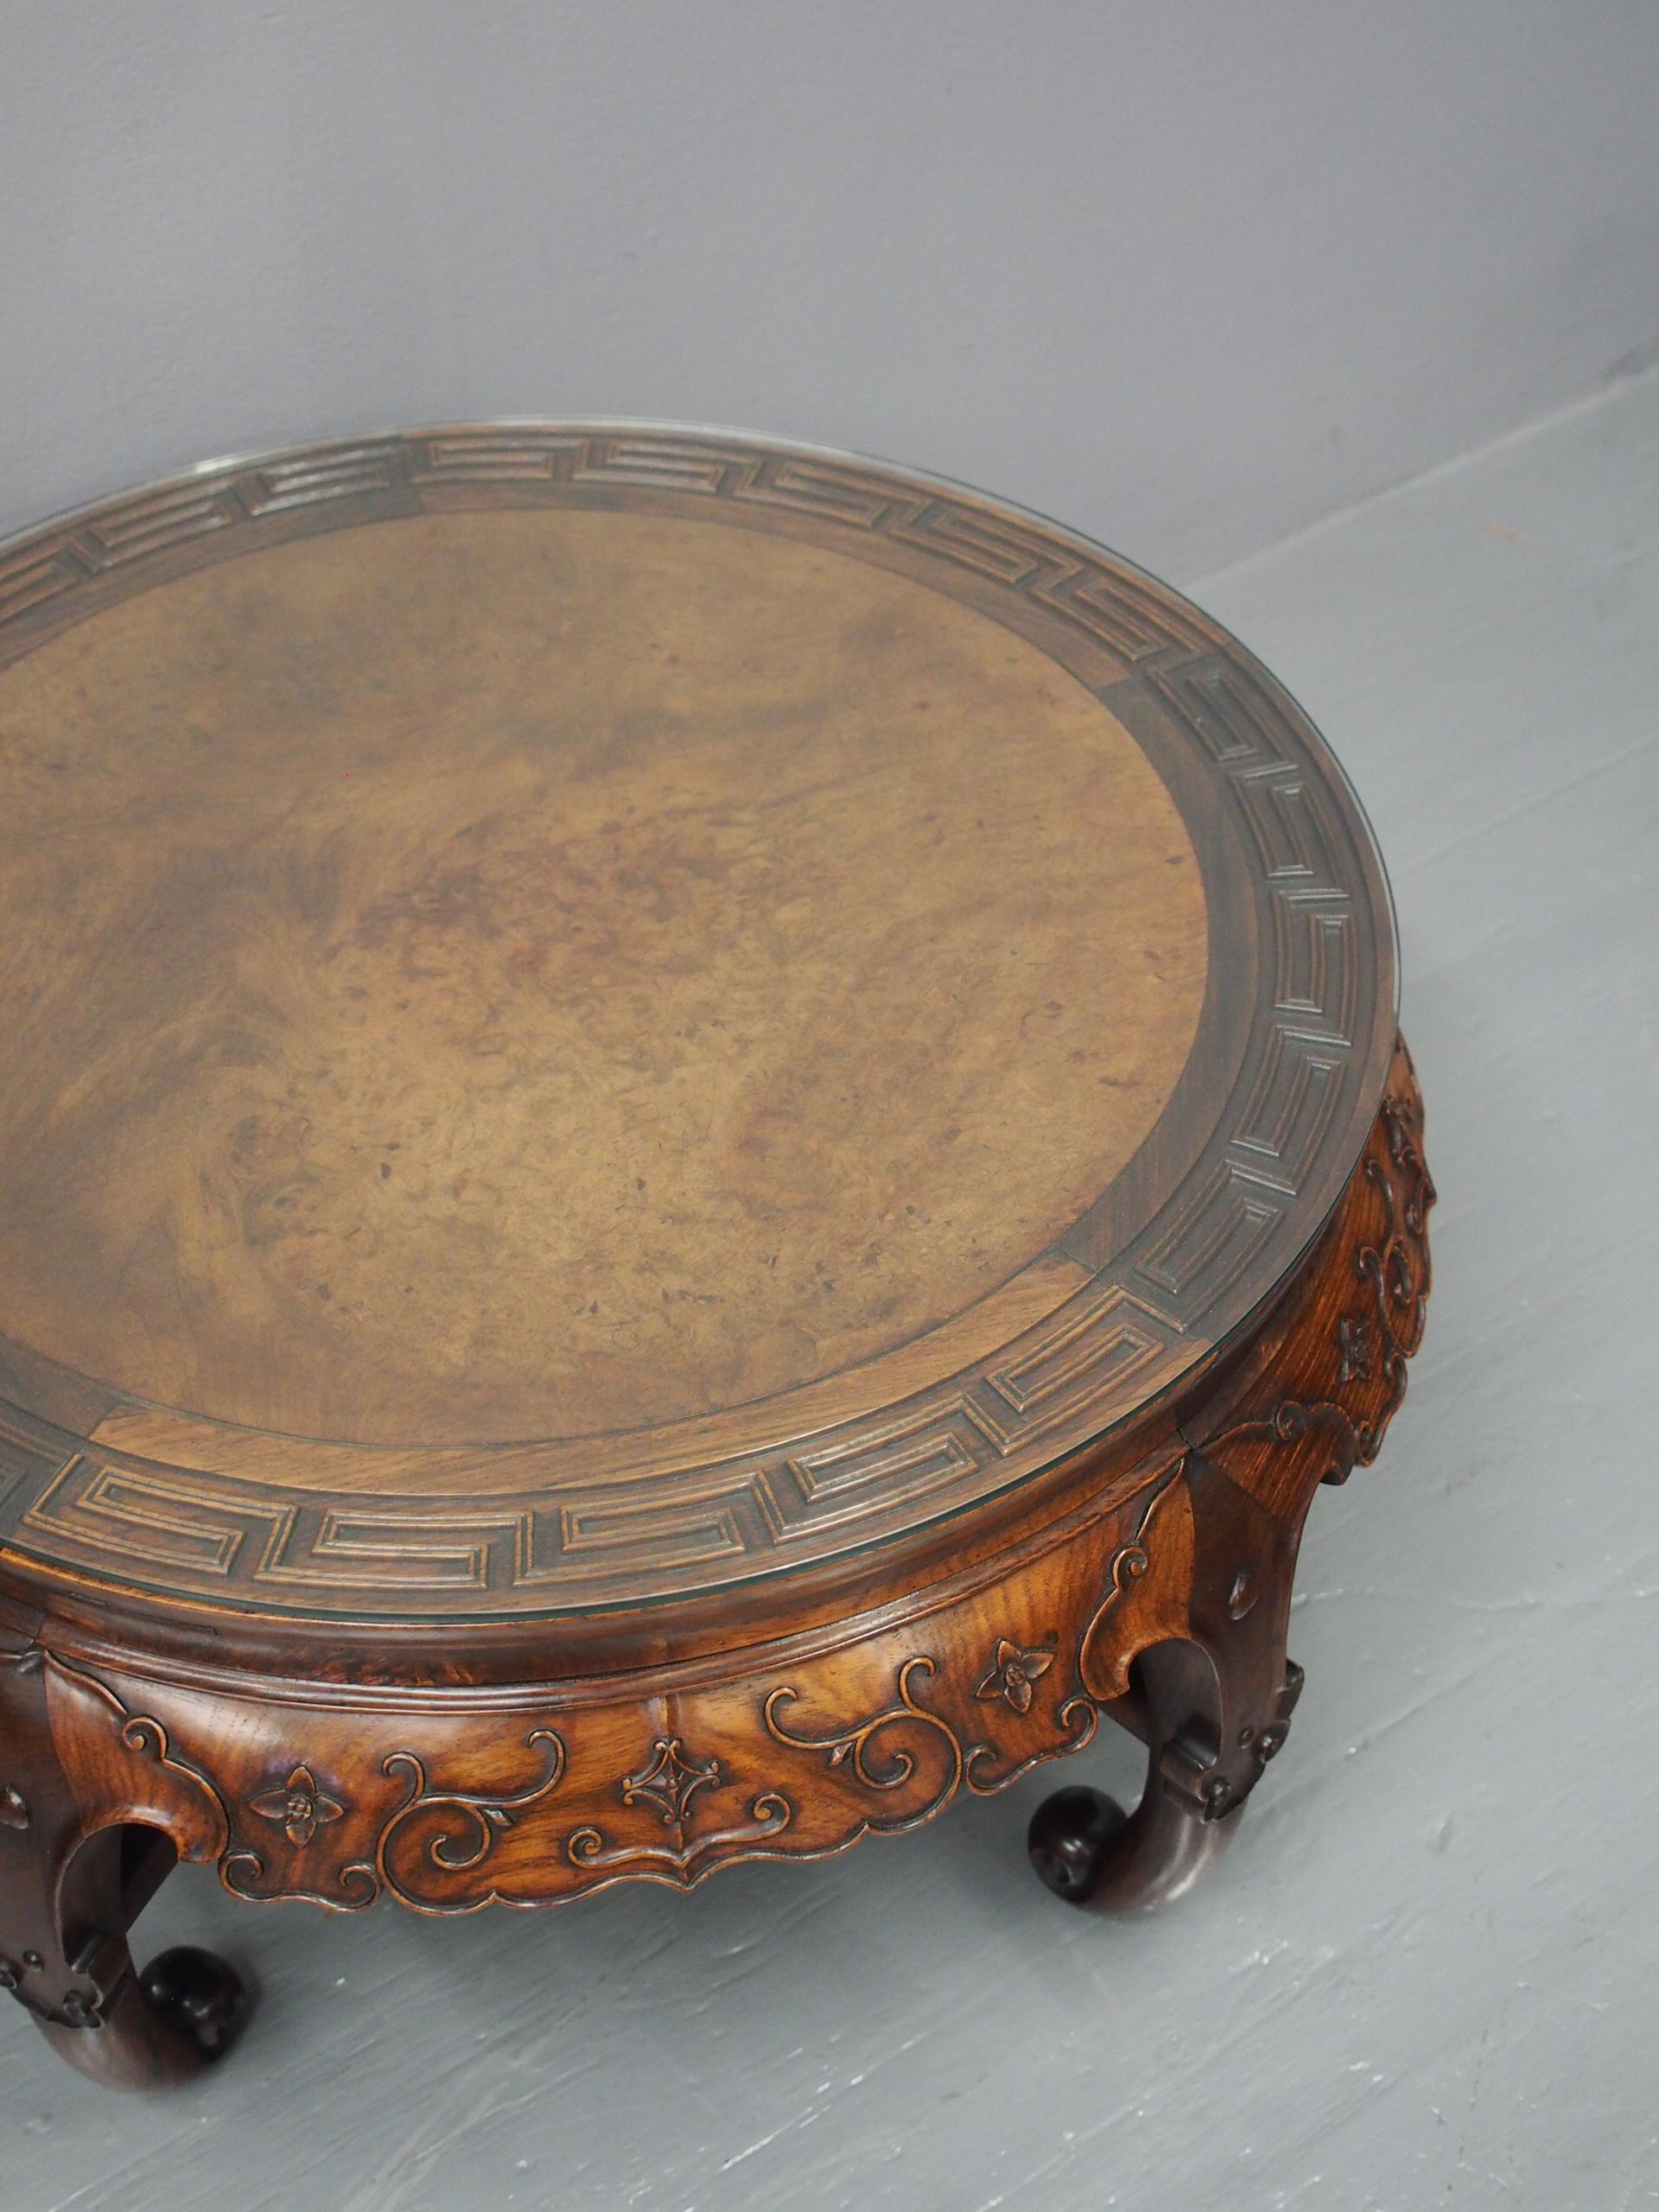 Qing dynasty Chinese Huanghuali low table, circa 1900. With burr wood centre, carved border and an ogee section beneath it with a flared apron with Chinese motifs and foliate carving. Standing on classic Chinese shaped legs with scrolling toes,